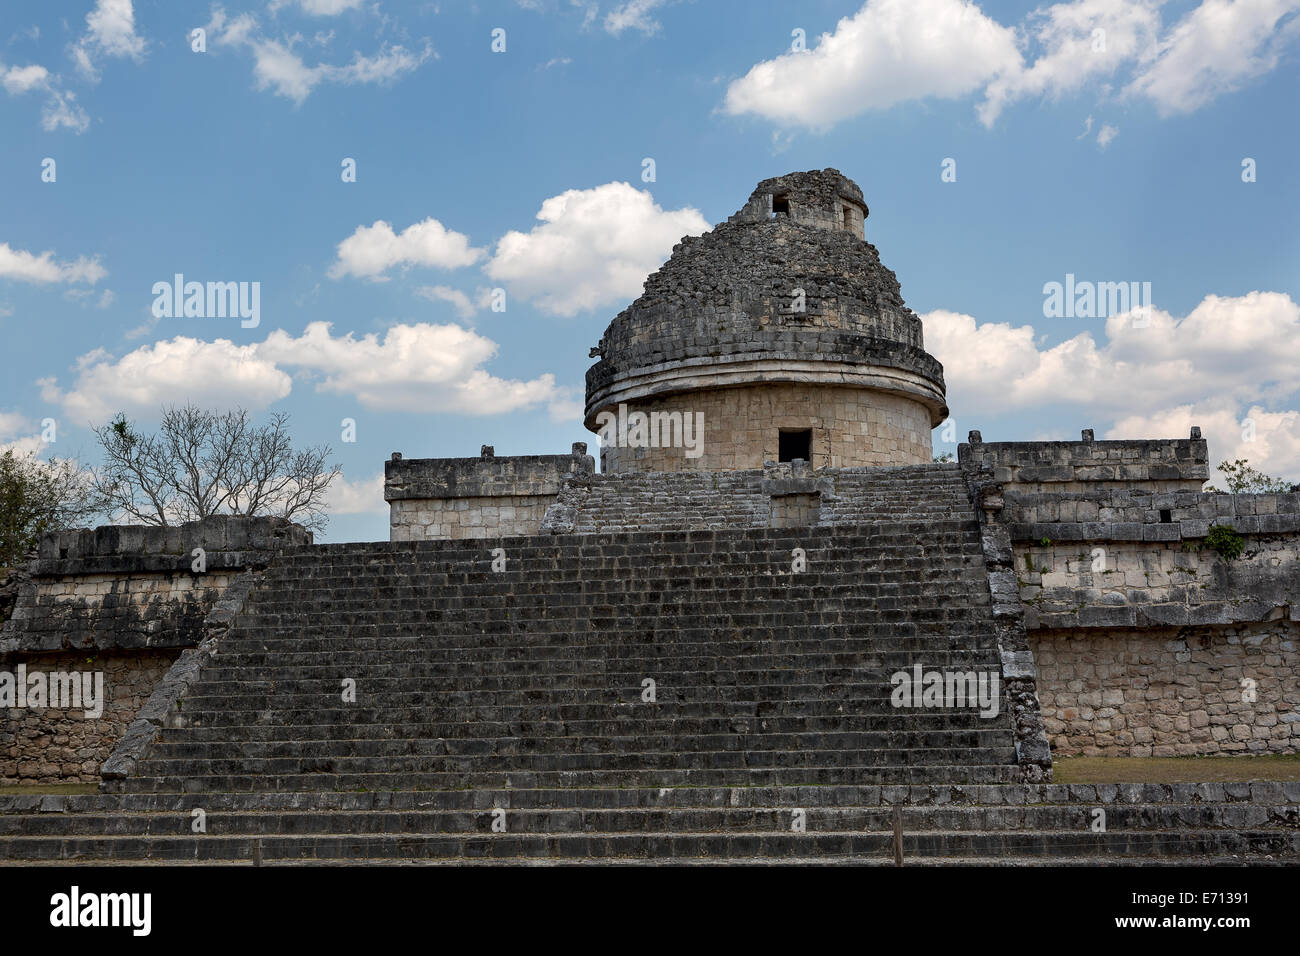 Mayan observatory building in Chichen Itza Stock Photo